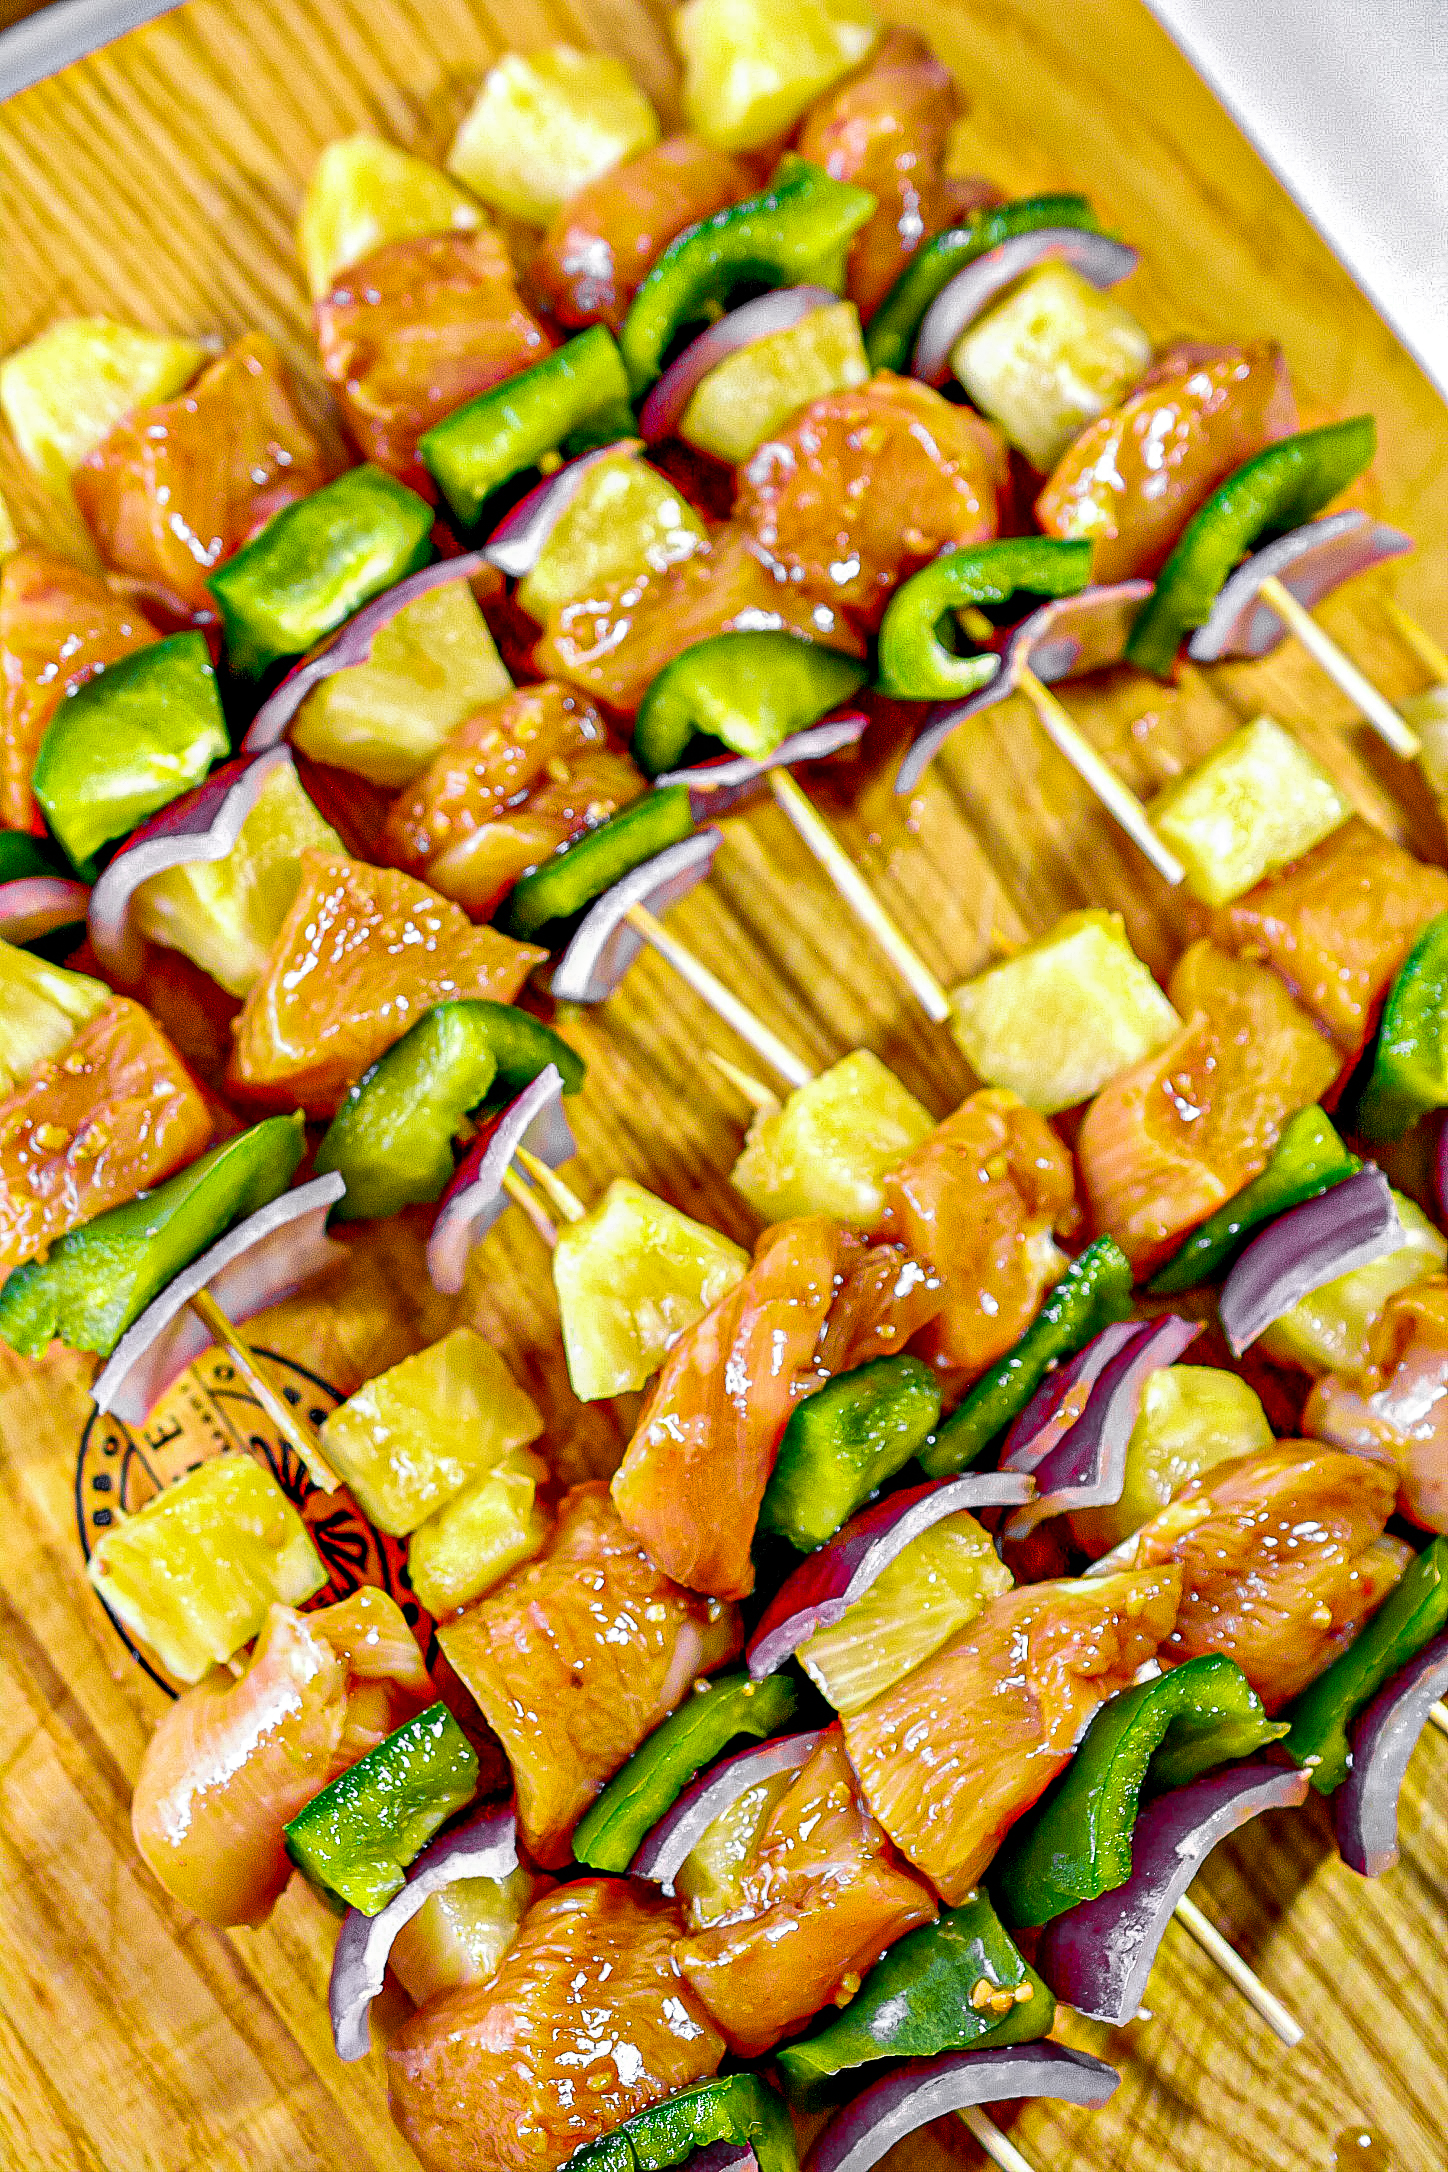 Fill the skewers with chunks of onion, pepper, the marinated chicken and pineapple chunks.